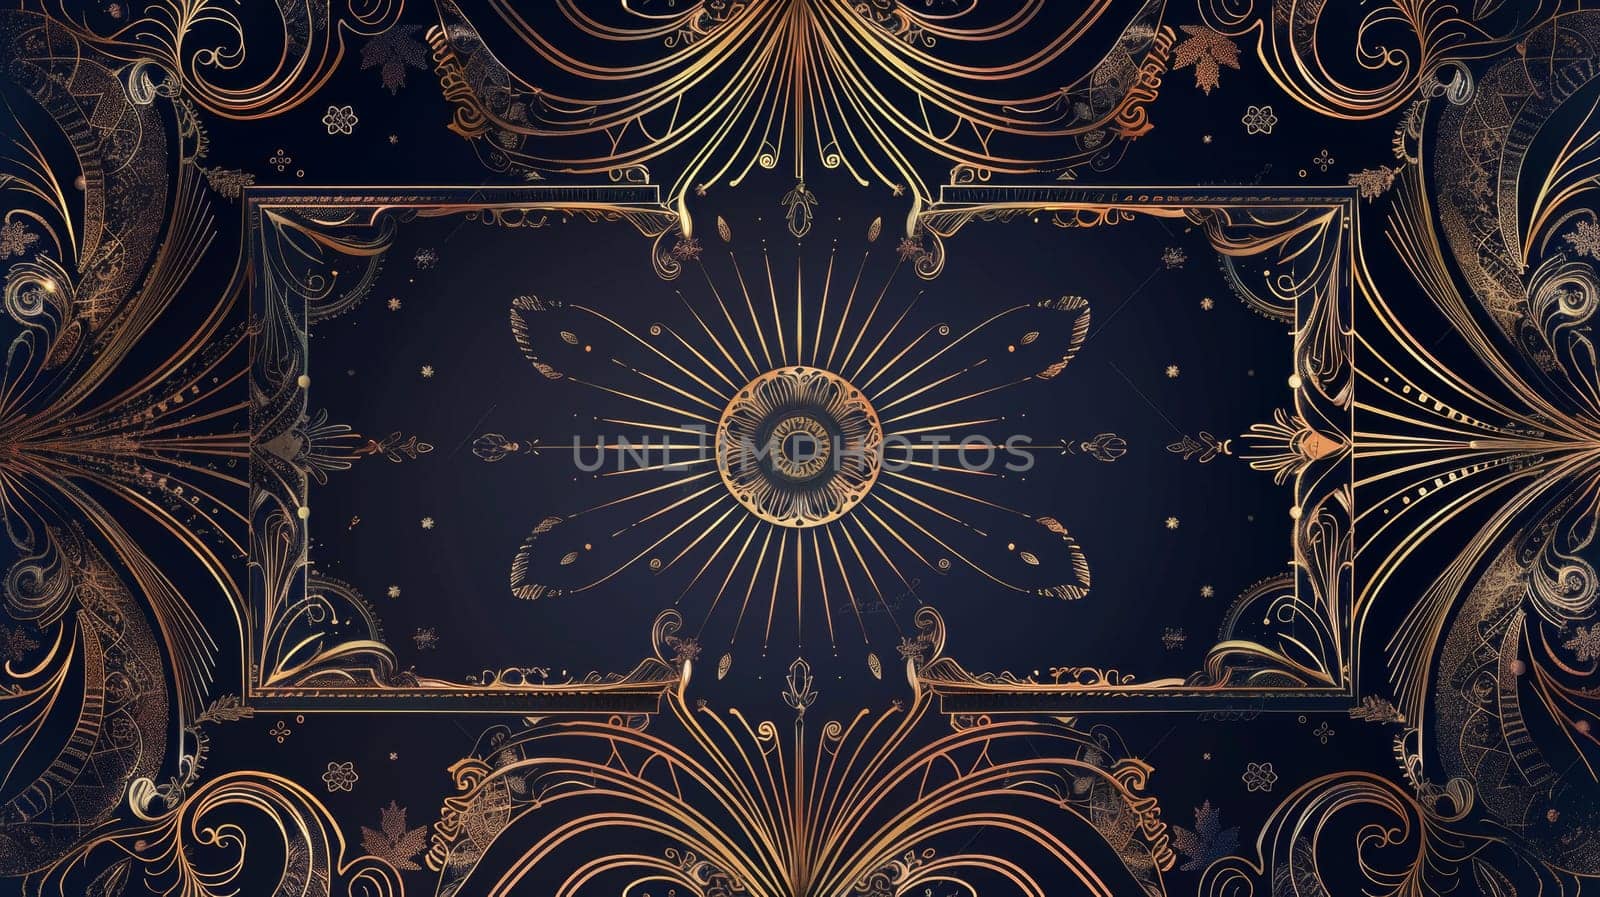 Modern illustration of elegant art nouveau classic antique design with gold gradient and frame on dark background. Ideal for galas, grand openings, etc.